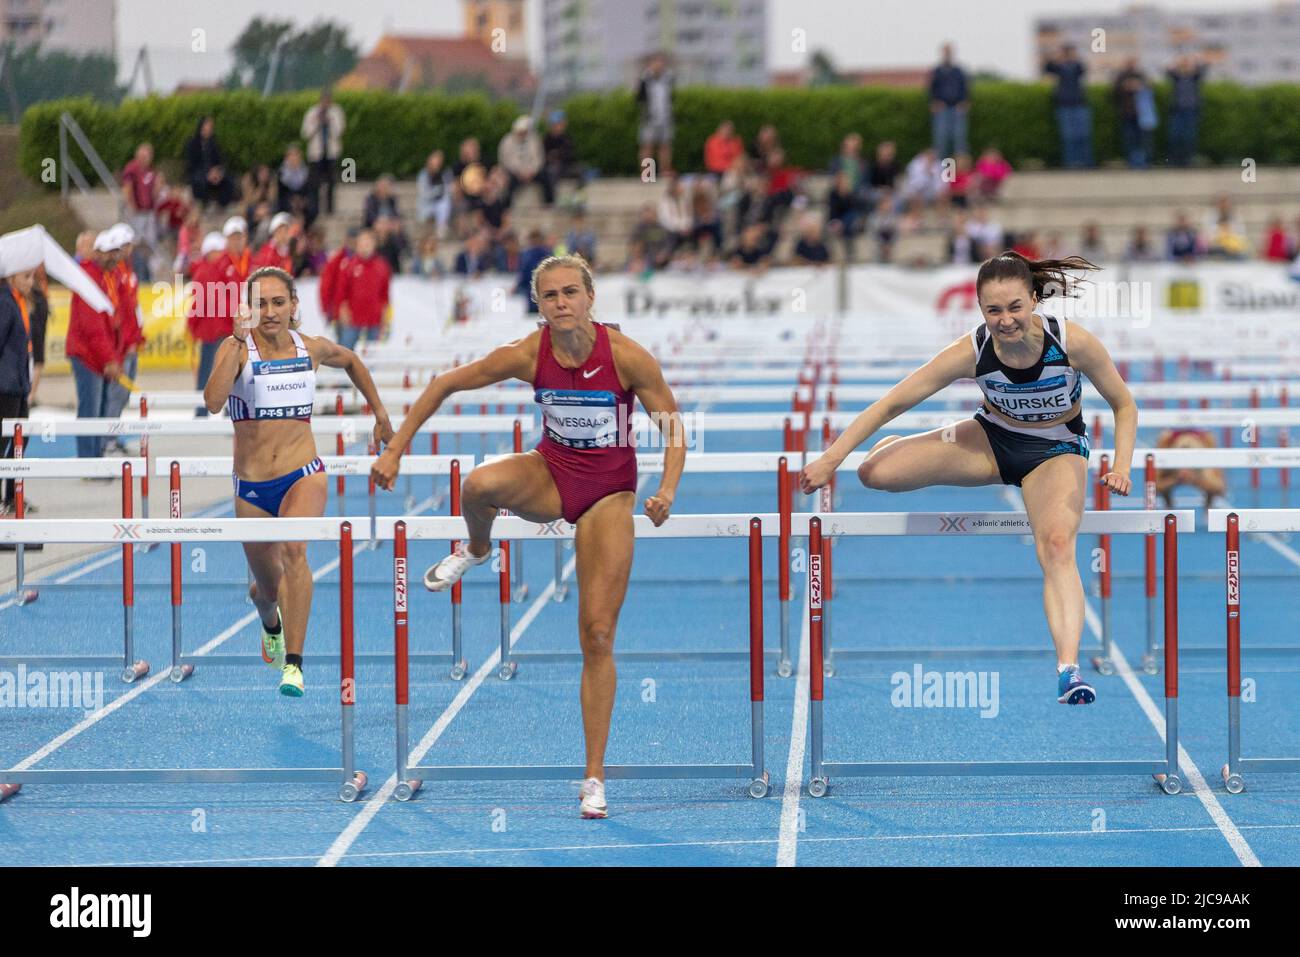 100 m Hurdles Women at the P-T-S athletics meeting in the sports site of x-bionic sphere® in Šamorín, Slovakia, 9. June 2022 Stock Photo